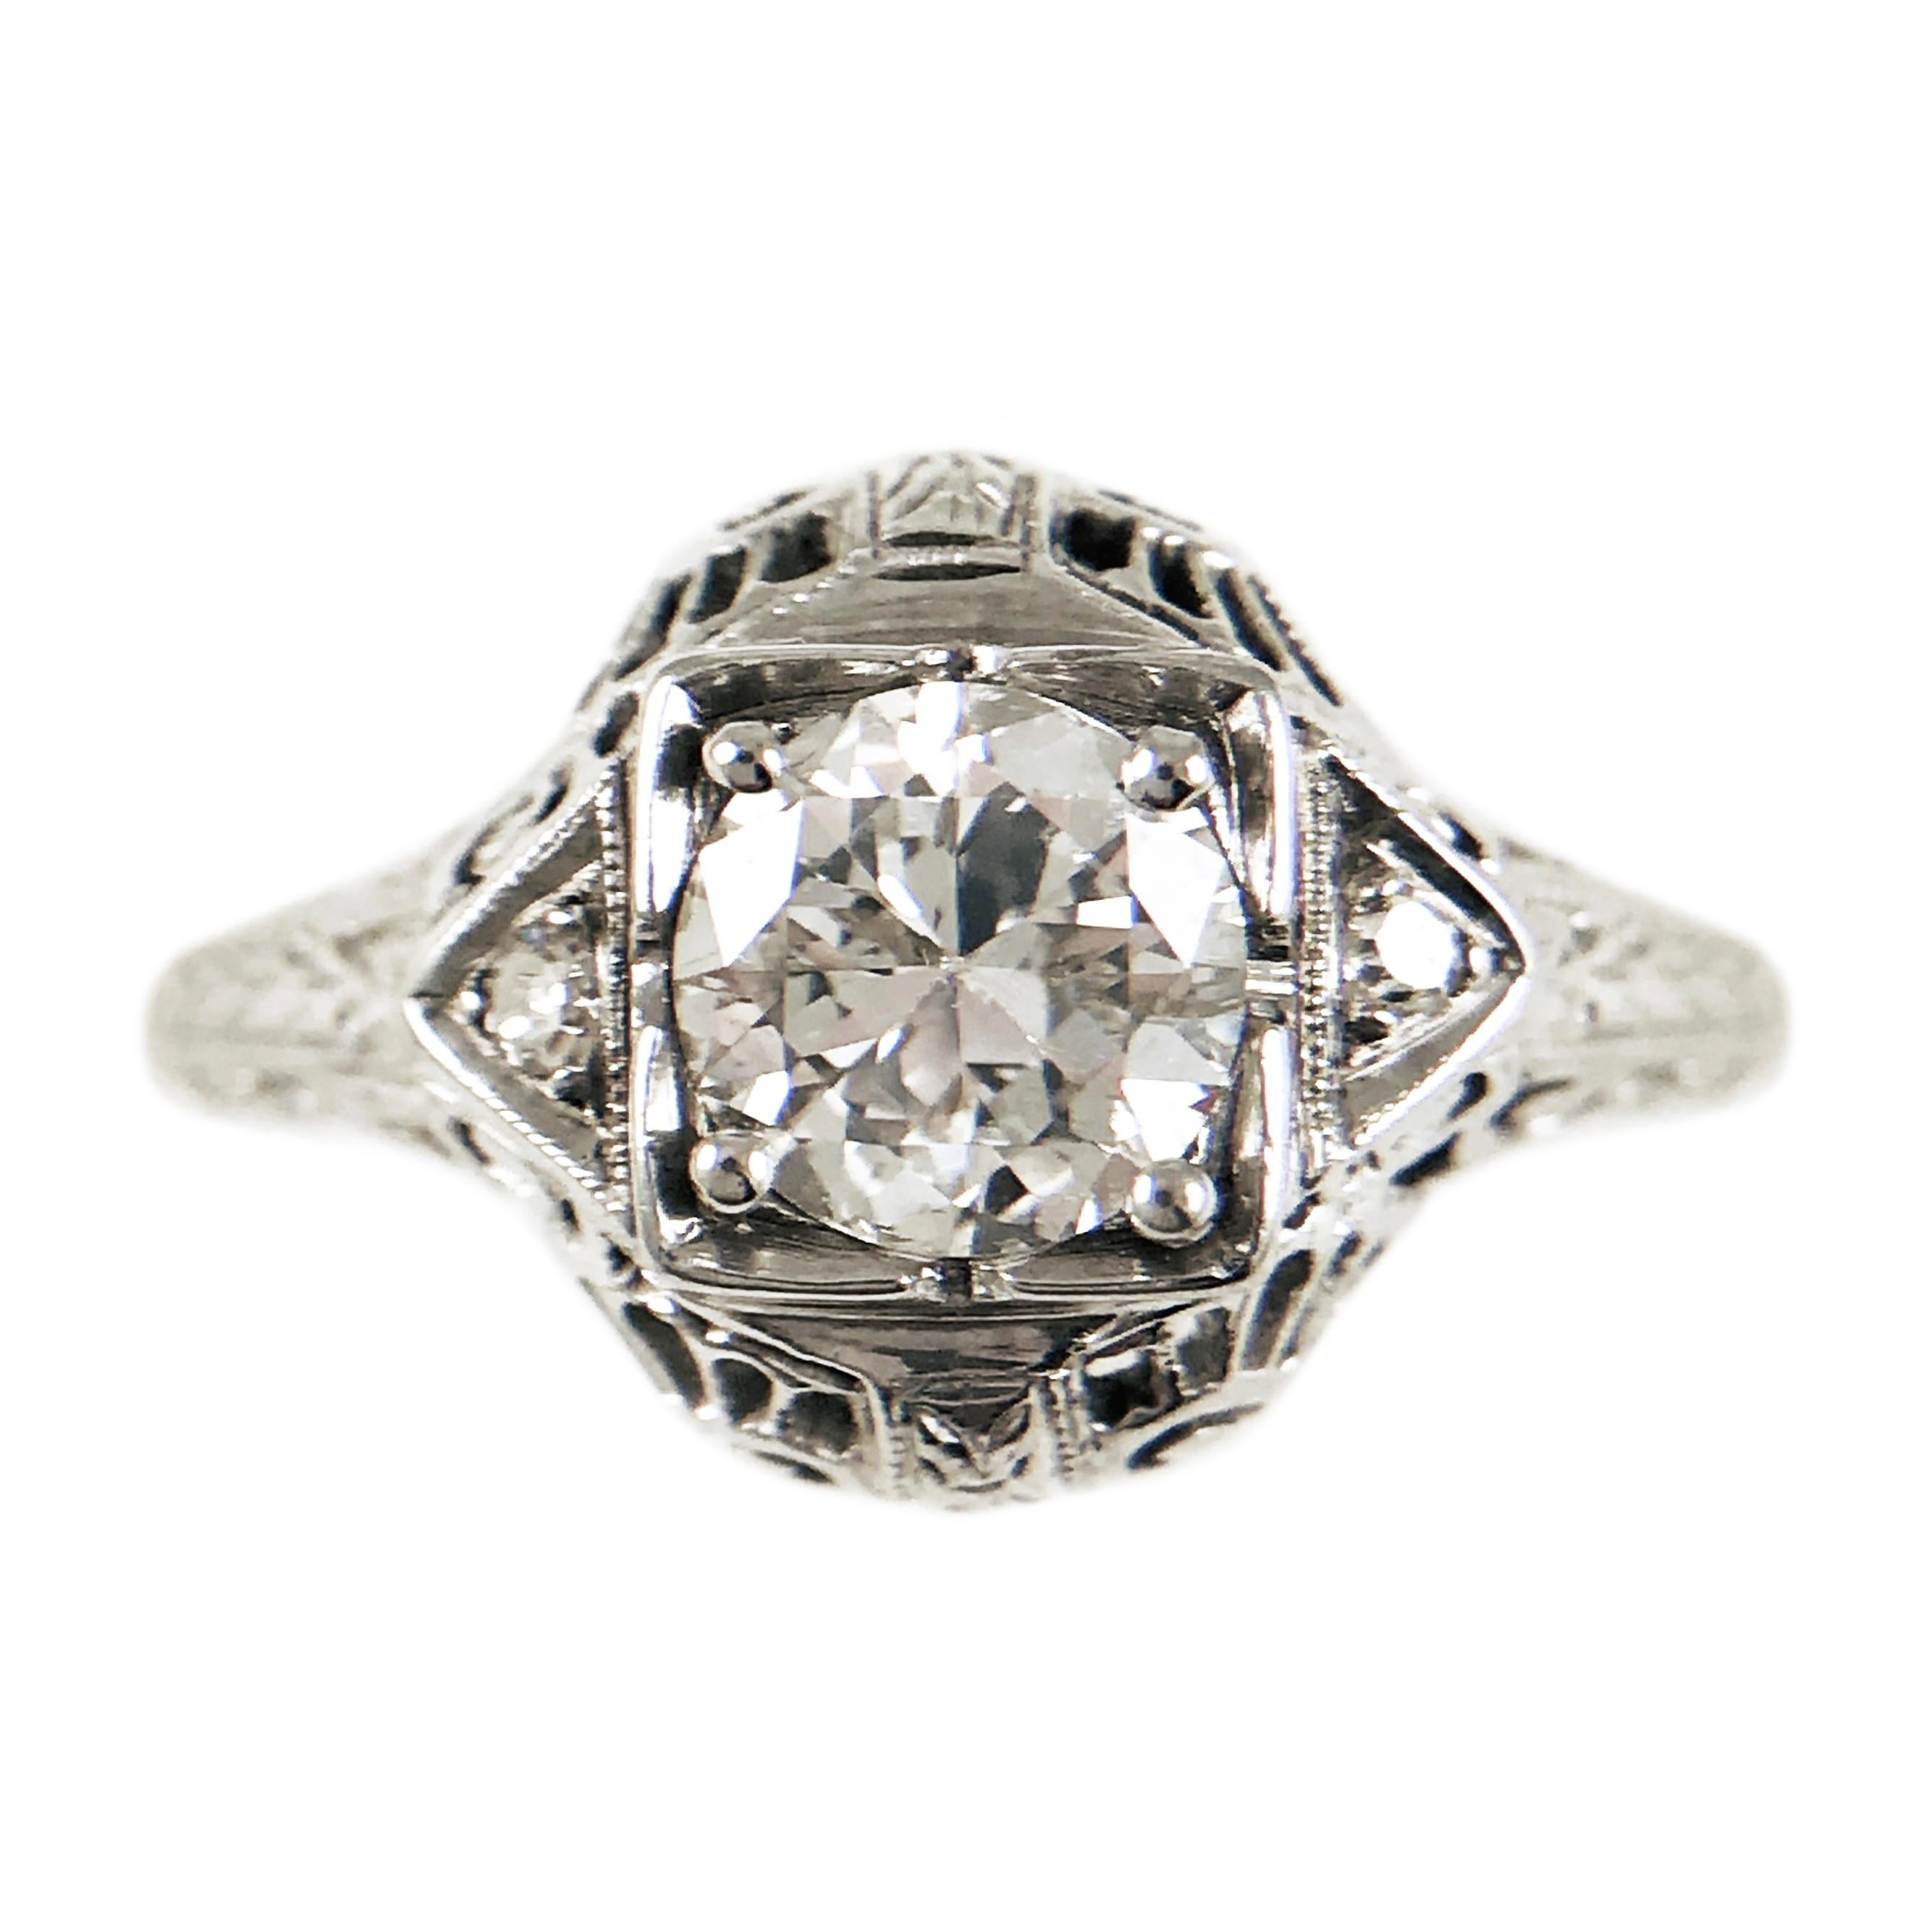 Art Deco 14 Karat White Gold Three Diamond Ring. Gorgeous filigree detail on this period-correct ring. The center round brilliant-cut diamond serves as the focal point as the two smaller single-cut diamonds accent each side. The total carat weight